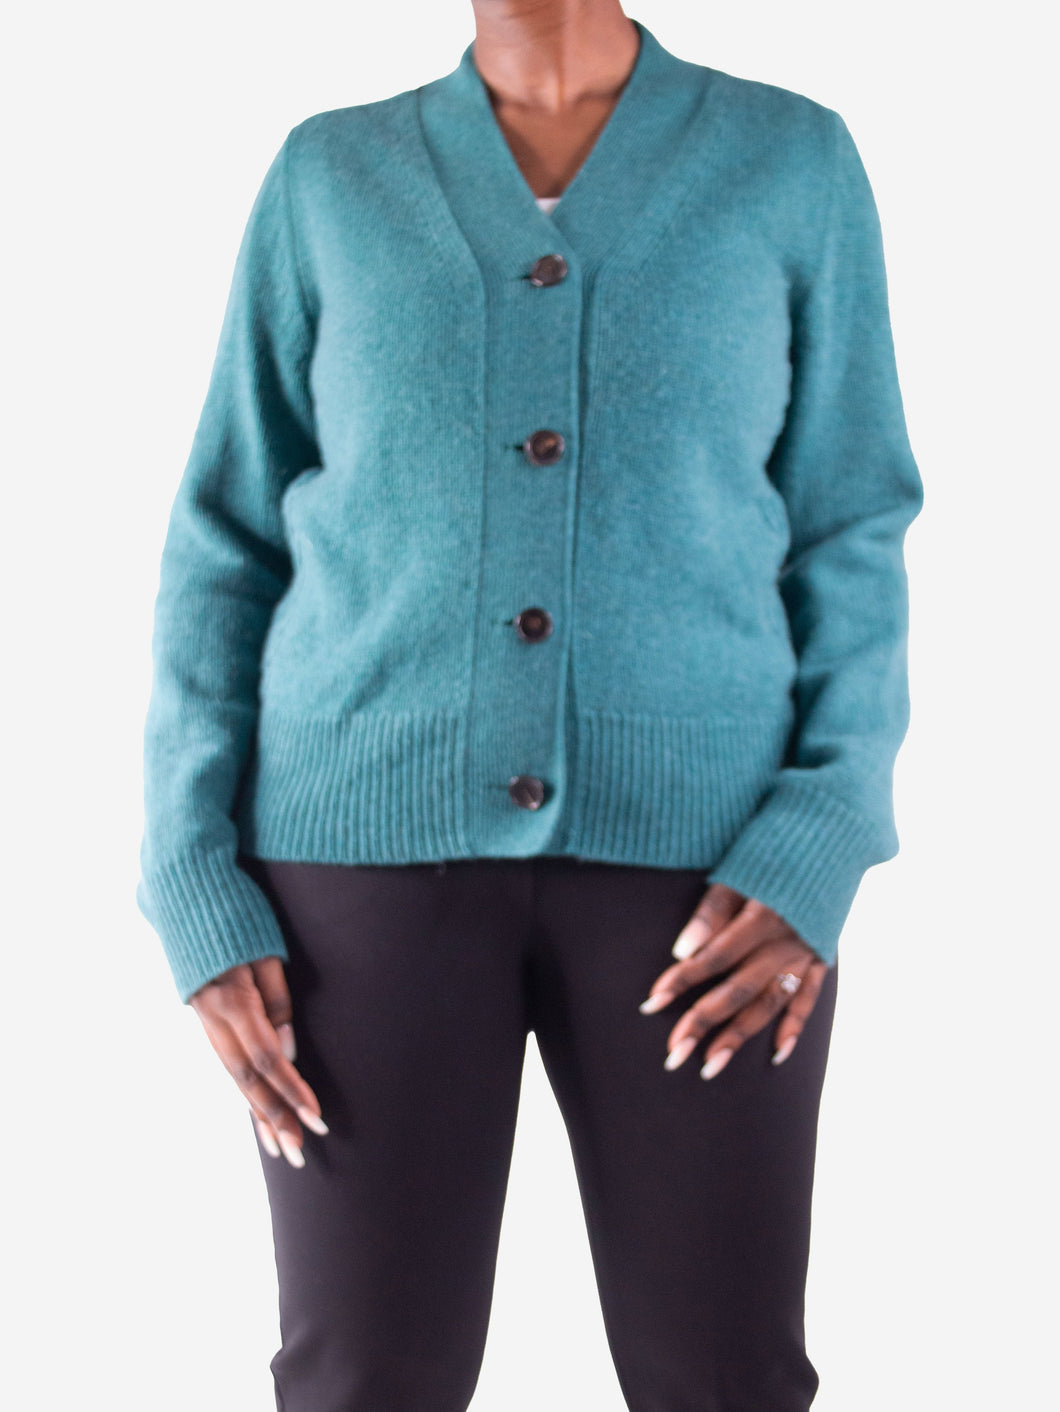 Teal button-up knitted cardigan - size L Knitwear Aethel 